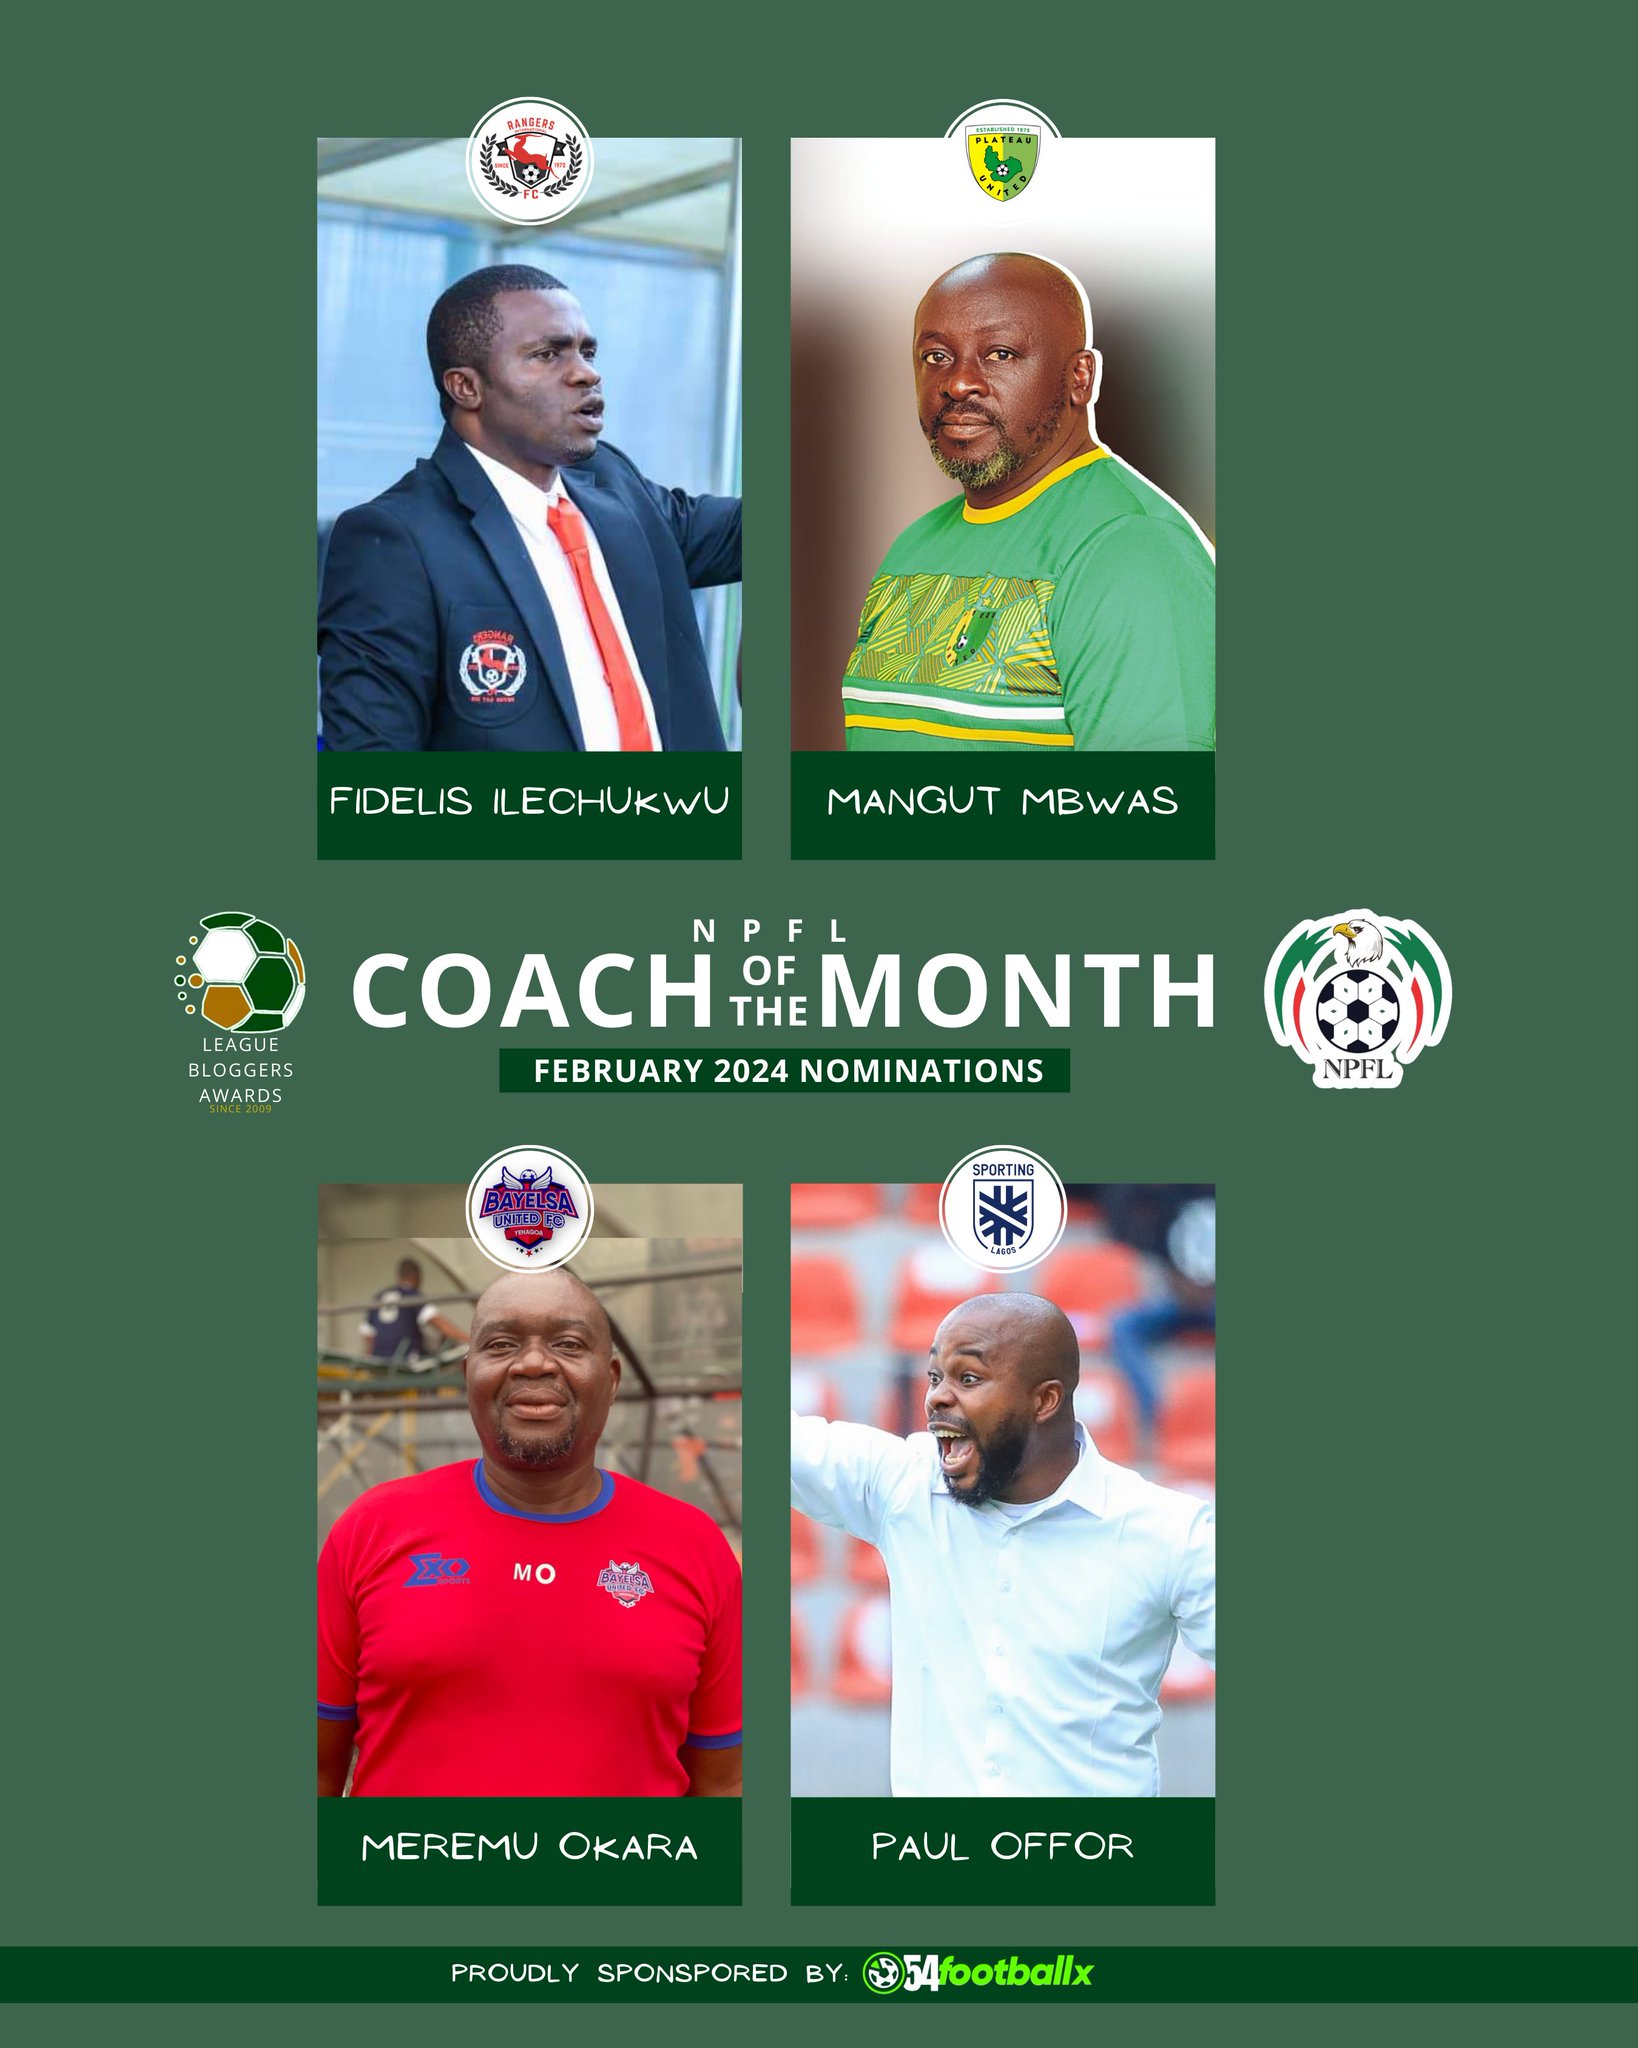 Ogunmodede, Mbwas and two other  managers vie for NPFL Coach of the Month